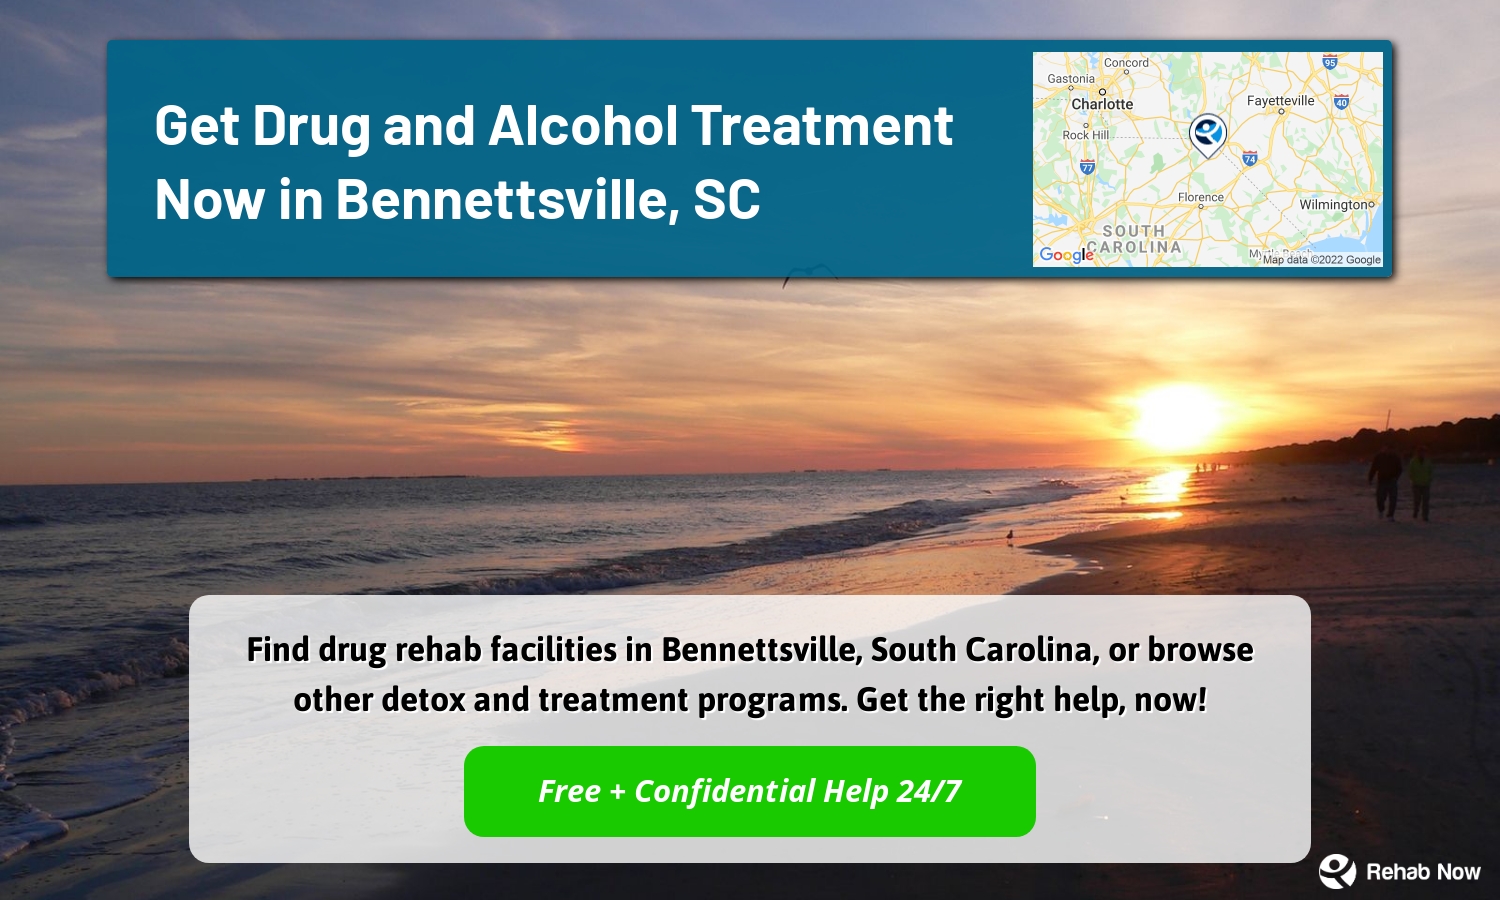 Find drug rehab facilities in Bennettsville, South Carolina, or browse other detox and treatment programs. Get the right help, now!